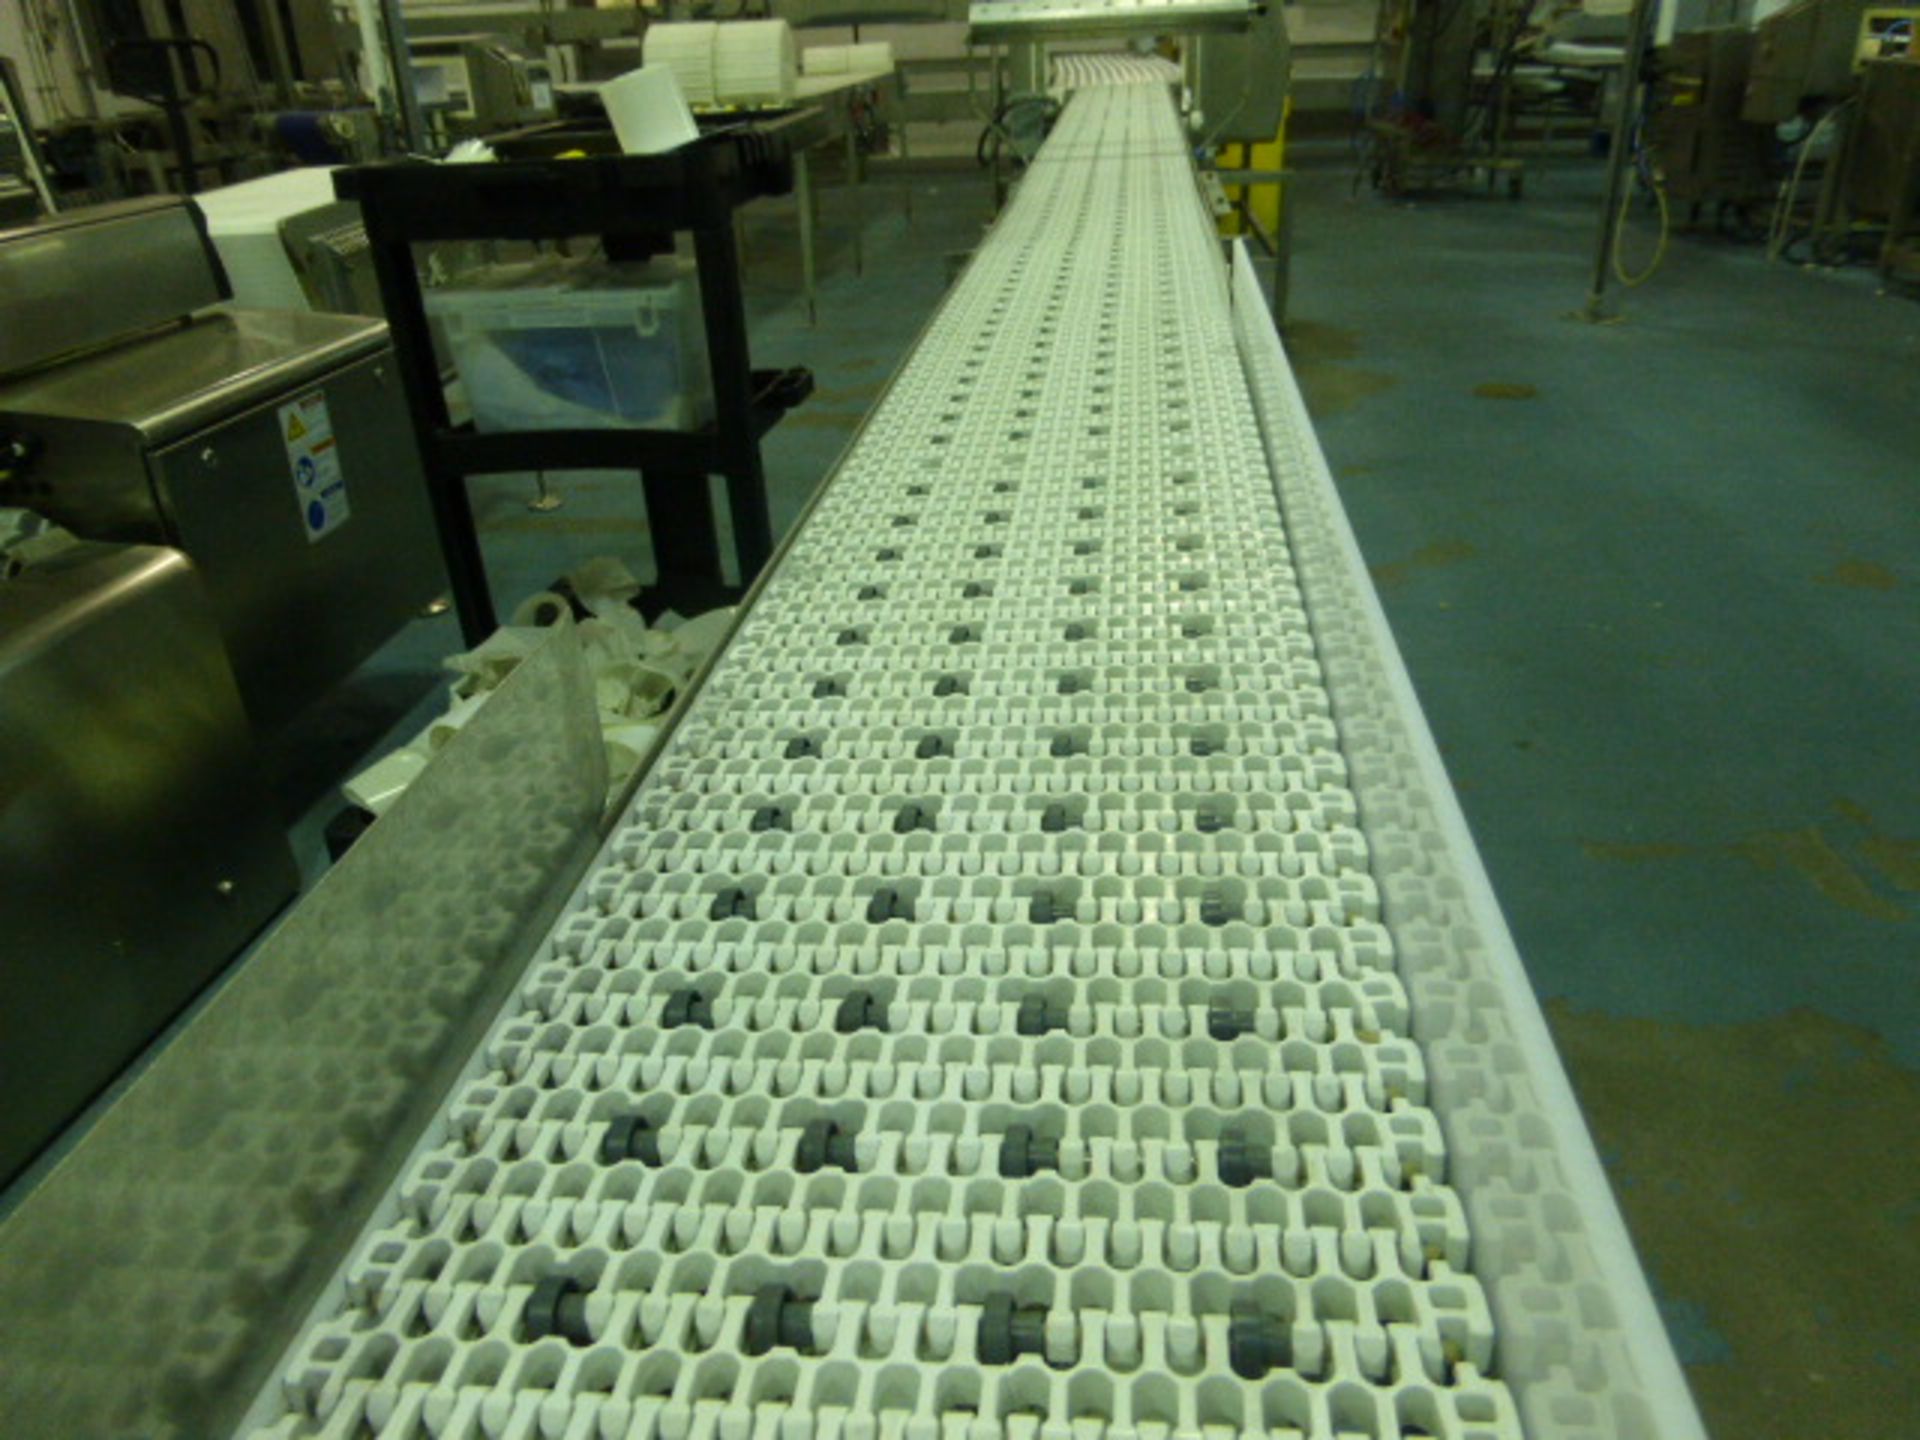 s/s transfer conveyor with plastic belting, 10 in. x 24 ft. - Image 2 of 2